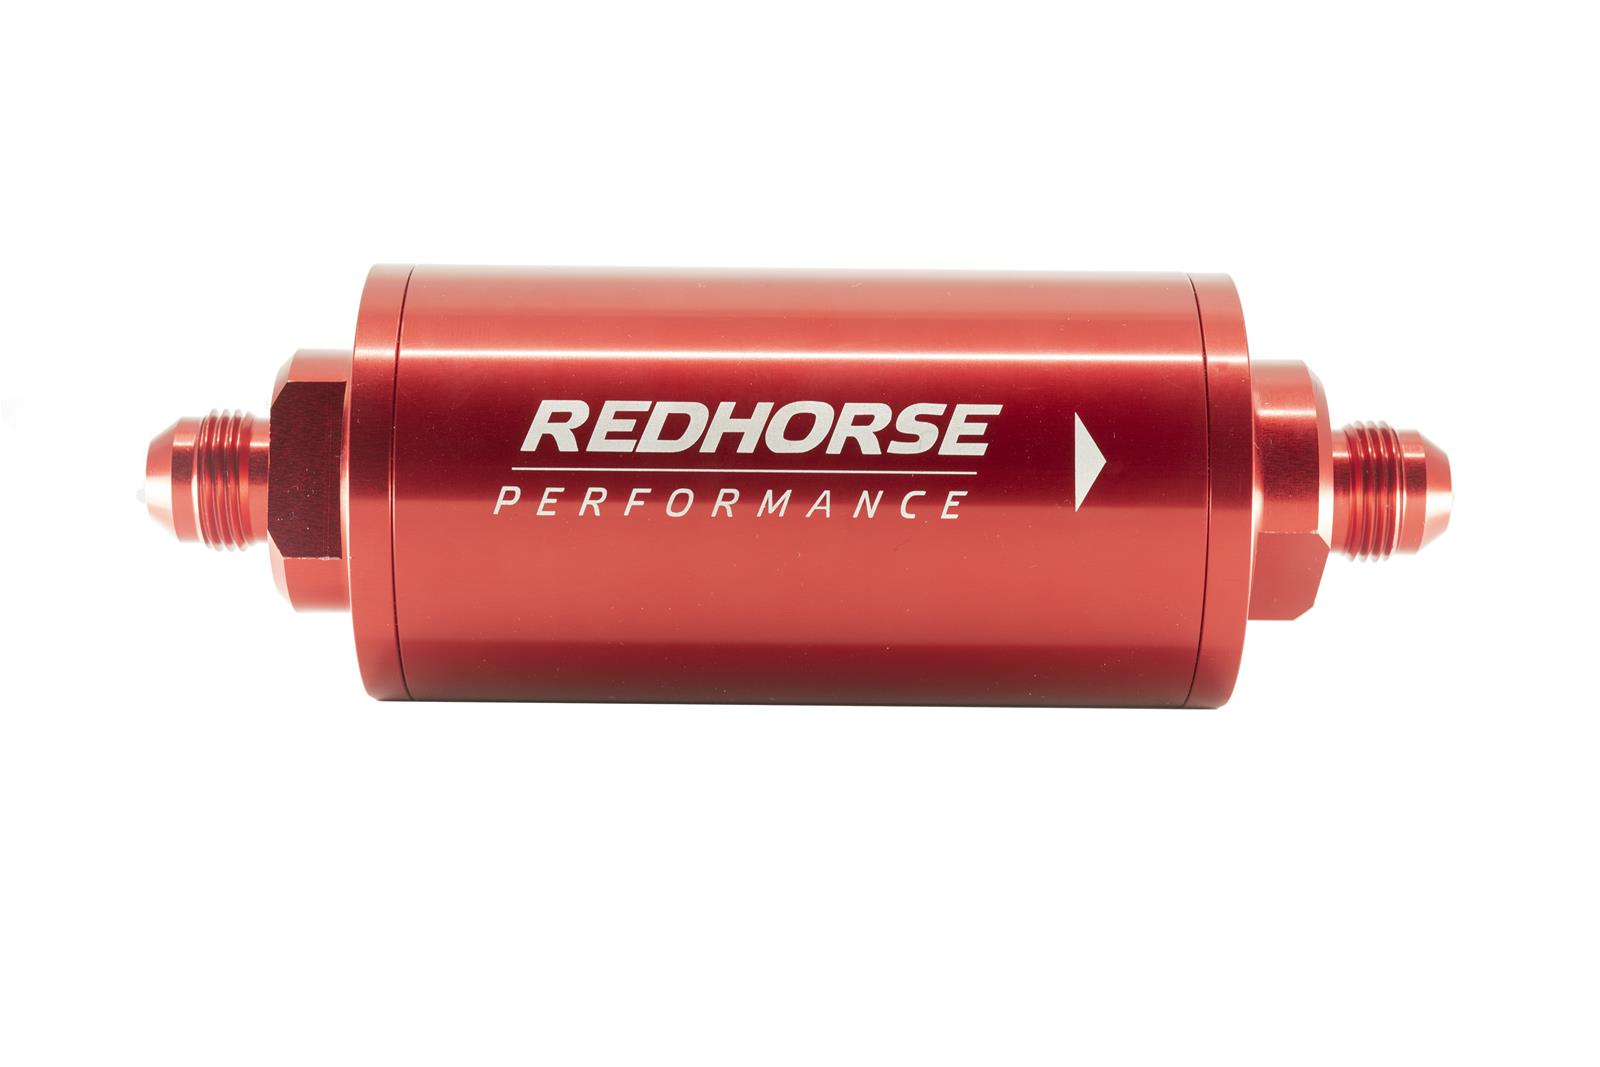 Redhorse Performance 4651-10-3-12 6in Cylindrical In-Line Race Fuel Filter w/ 12 Micron Fiberglass element - 10 AN